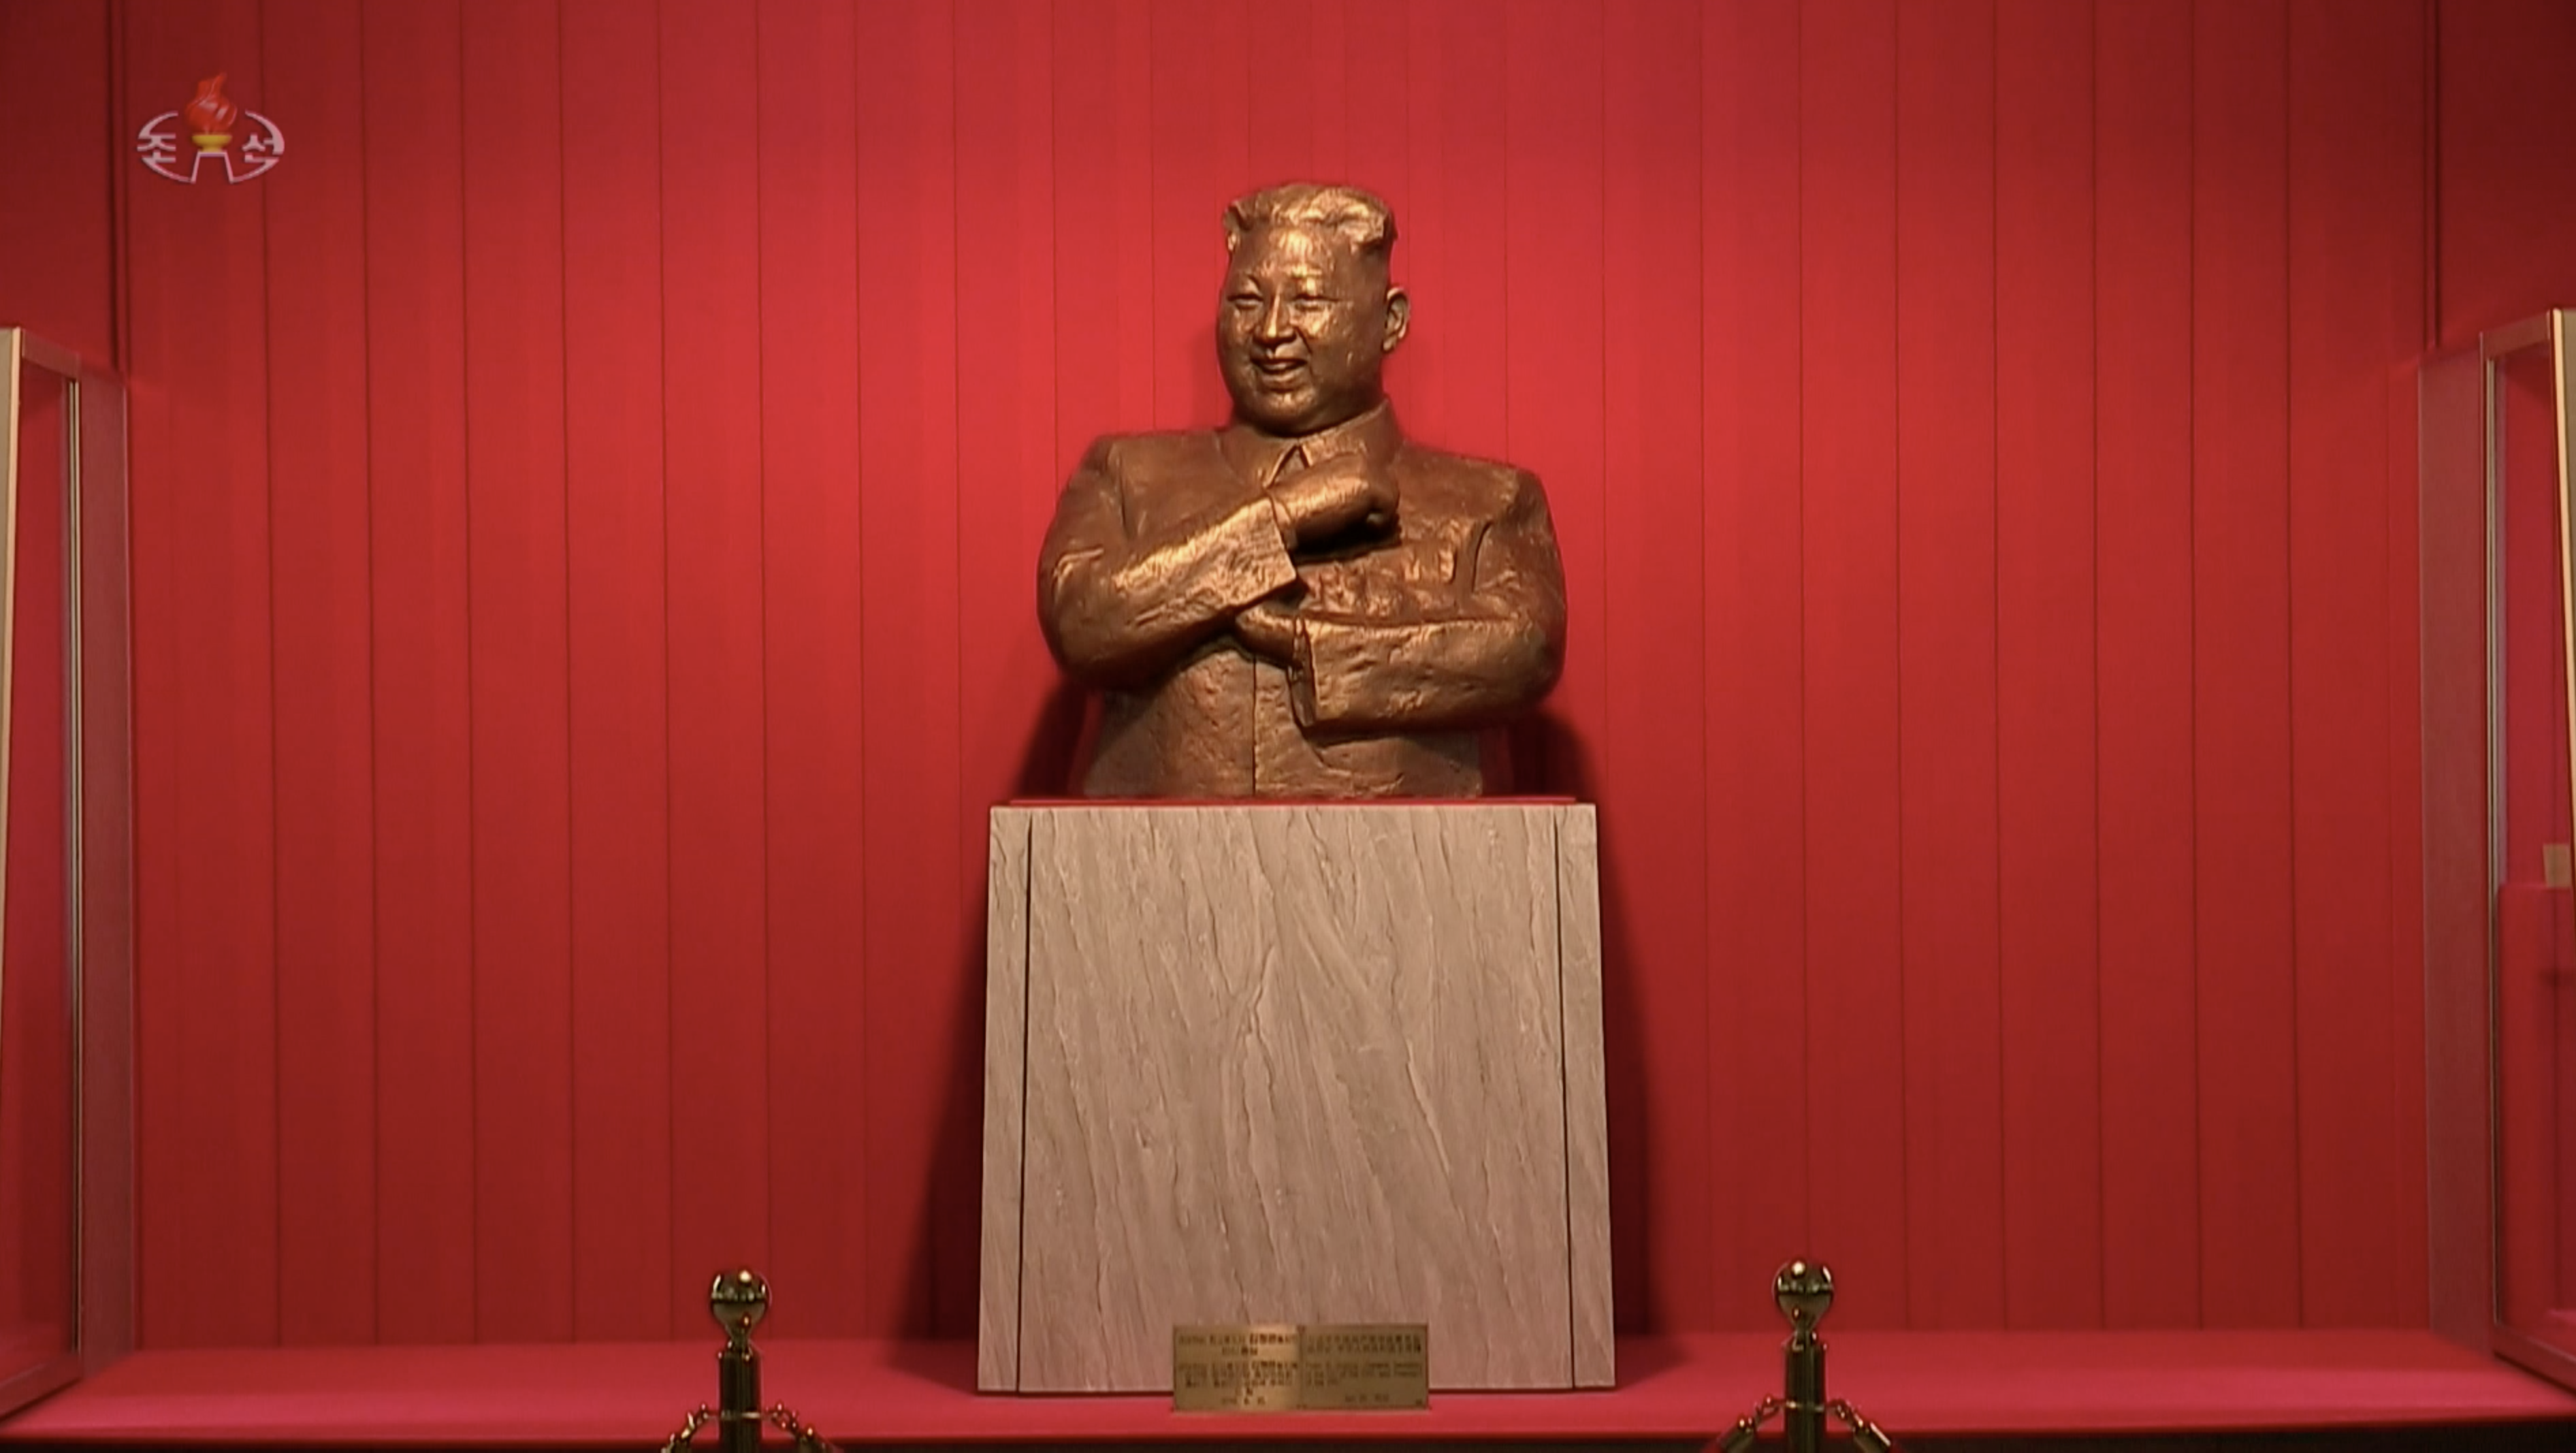 Swords And Statues North Korea Shows Off World Leaders Gifts To Kim Jong Un Nk News